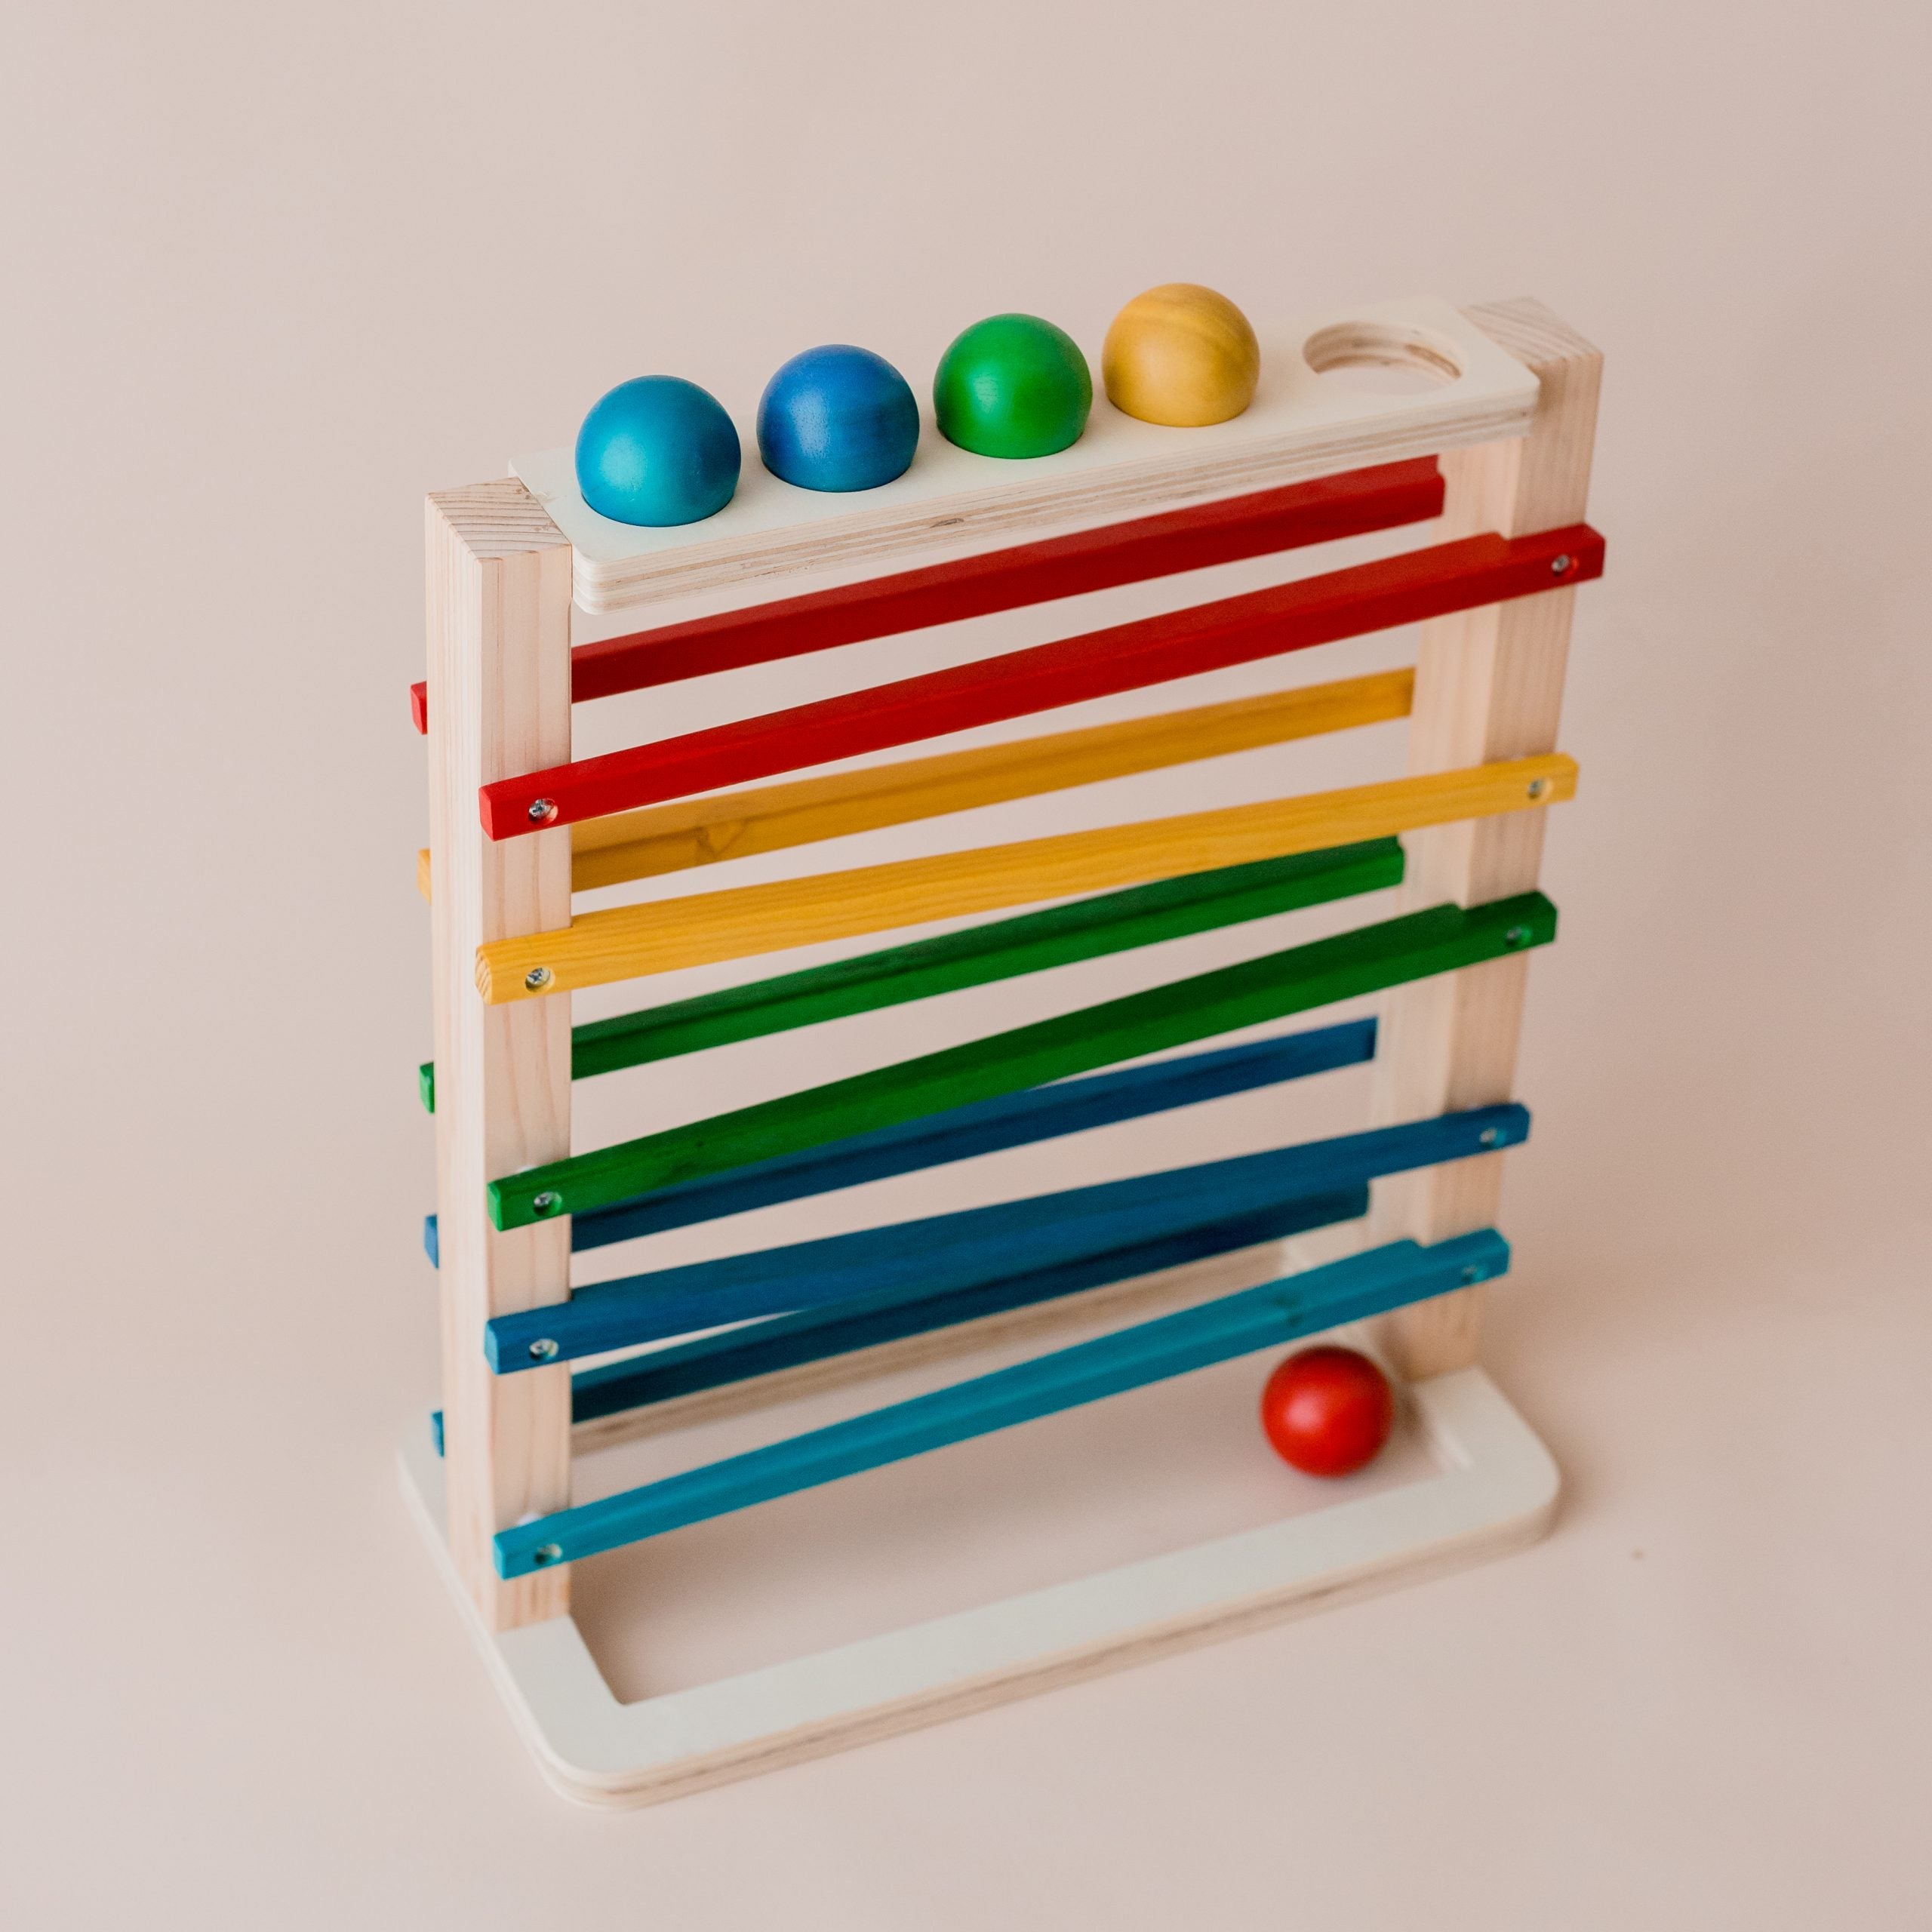 Colourful wooden track a ball rack toy from QToys. Shown with 5 balls. 2 blue, green, yellow and red.